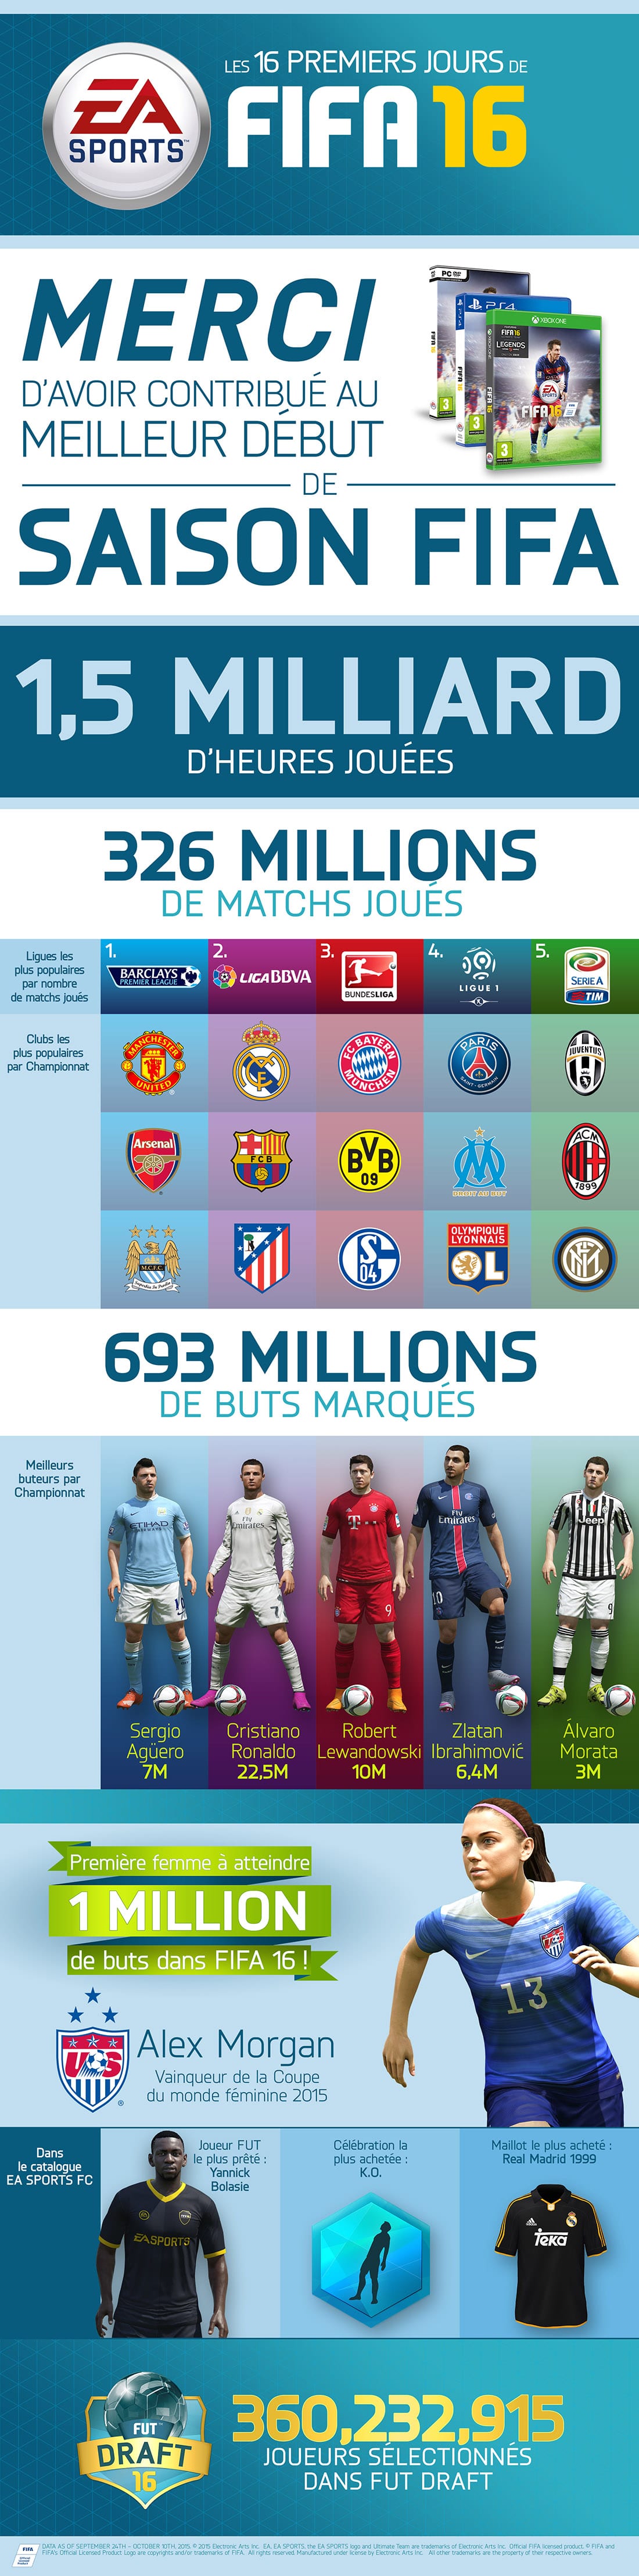 20151020_fifa16_infographic_first16days_final_fr_1mo